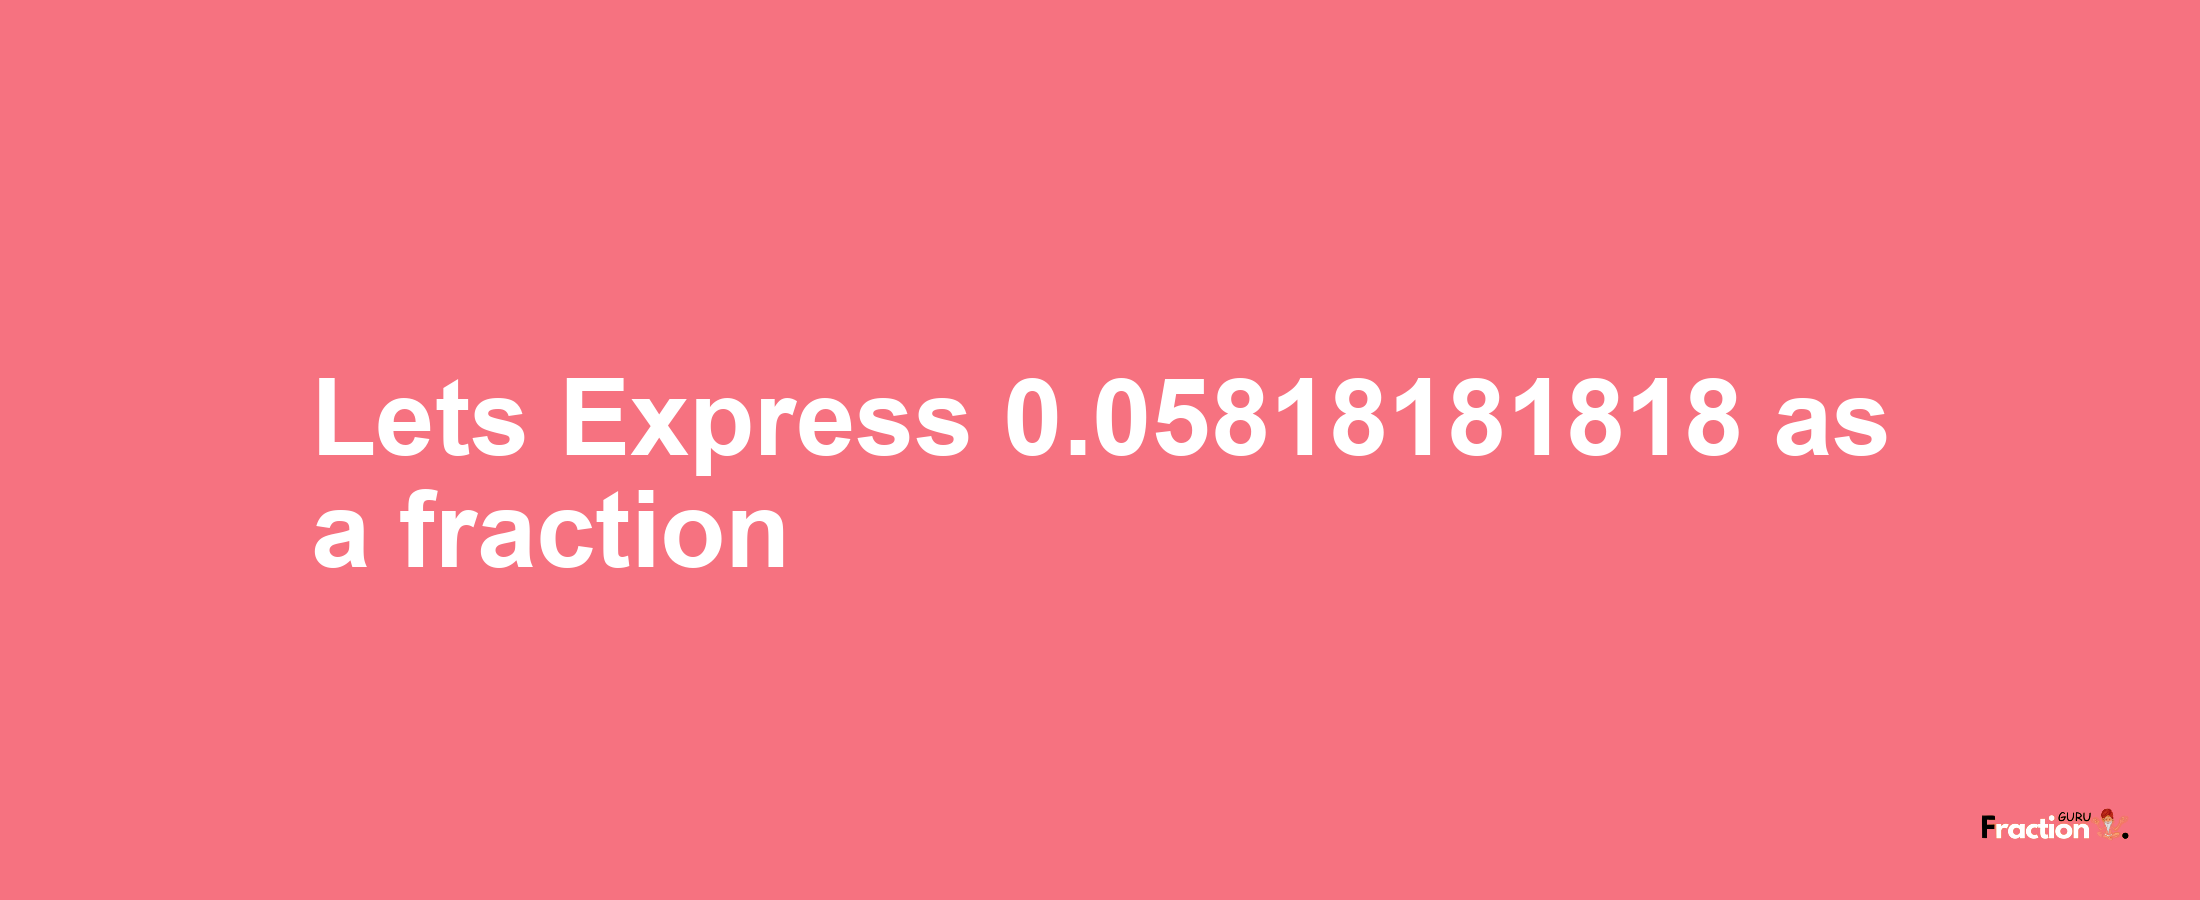 Lets Express 0.05818181818 as afraction